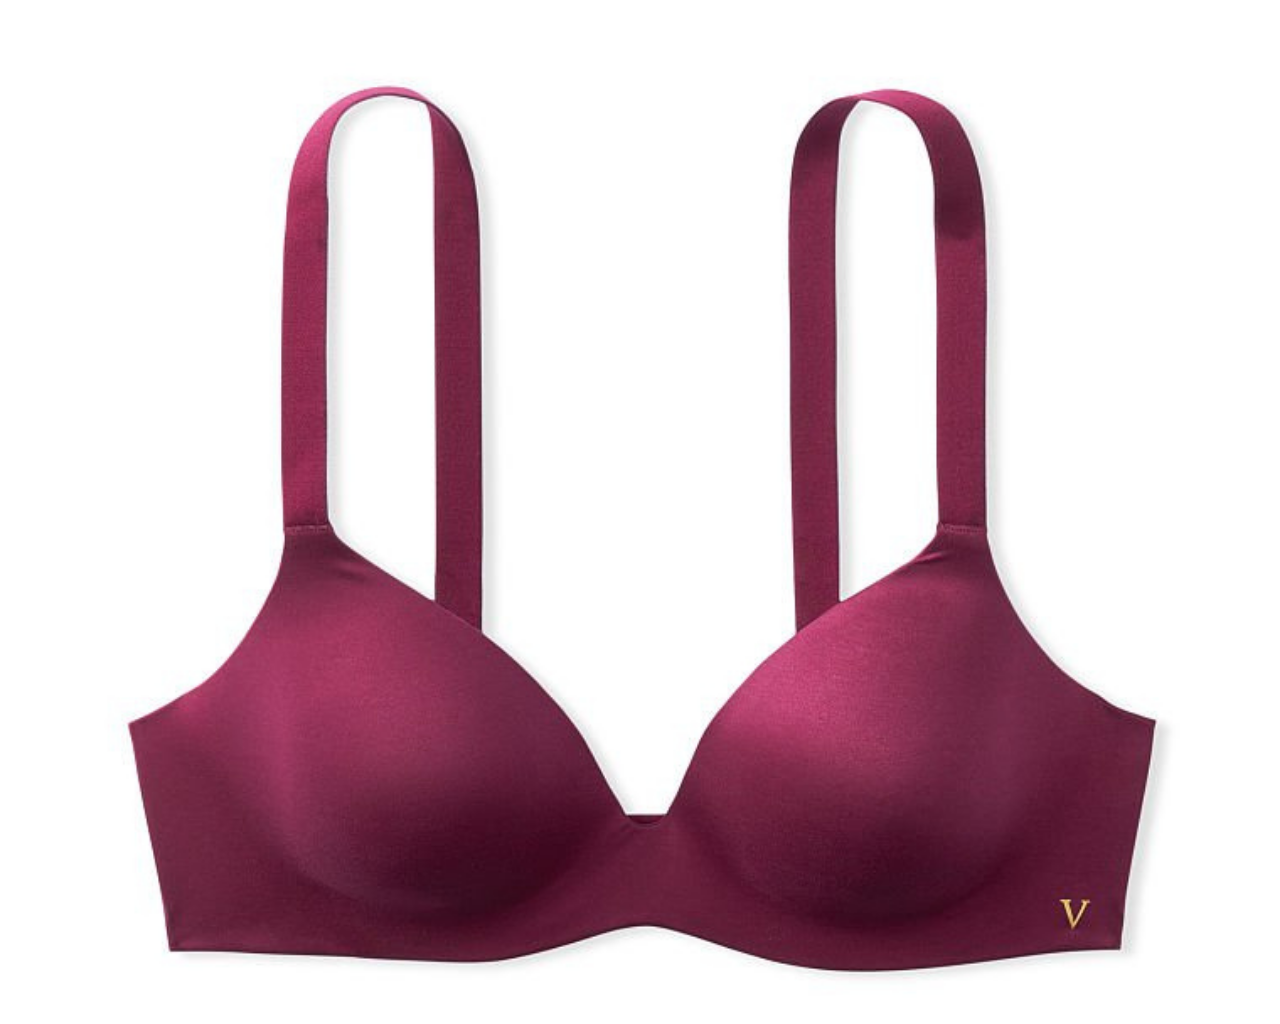 Victoria's Secret - The VS Bare Infinity Flex Bra offers the best of both  worlds. The innovative gel wire lifts and supports while inventive  technology gives the comfort and freedom of a